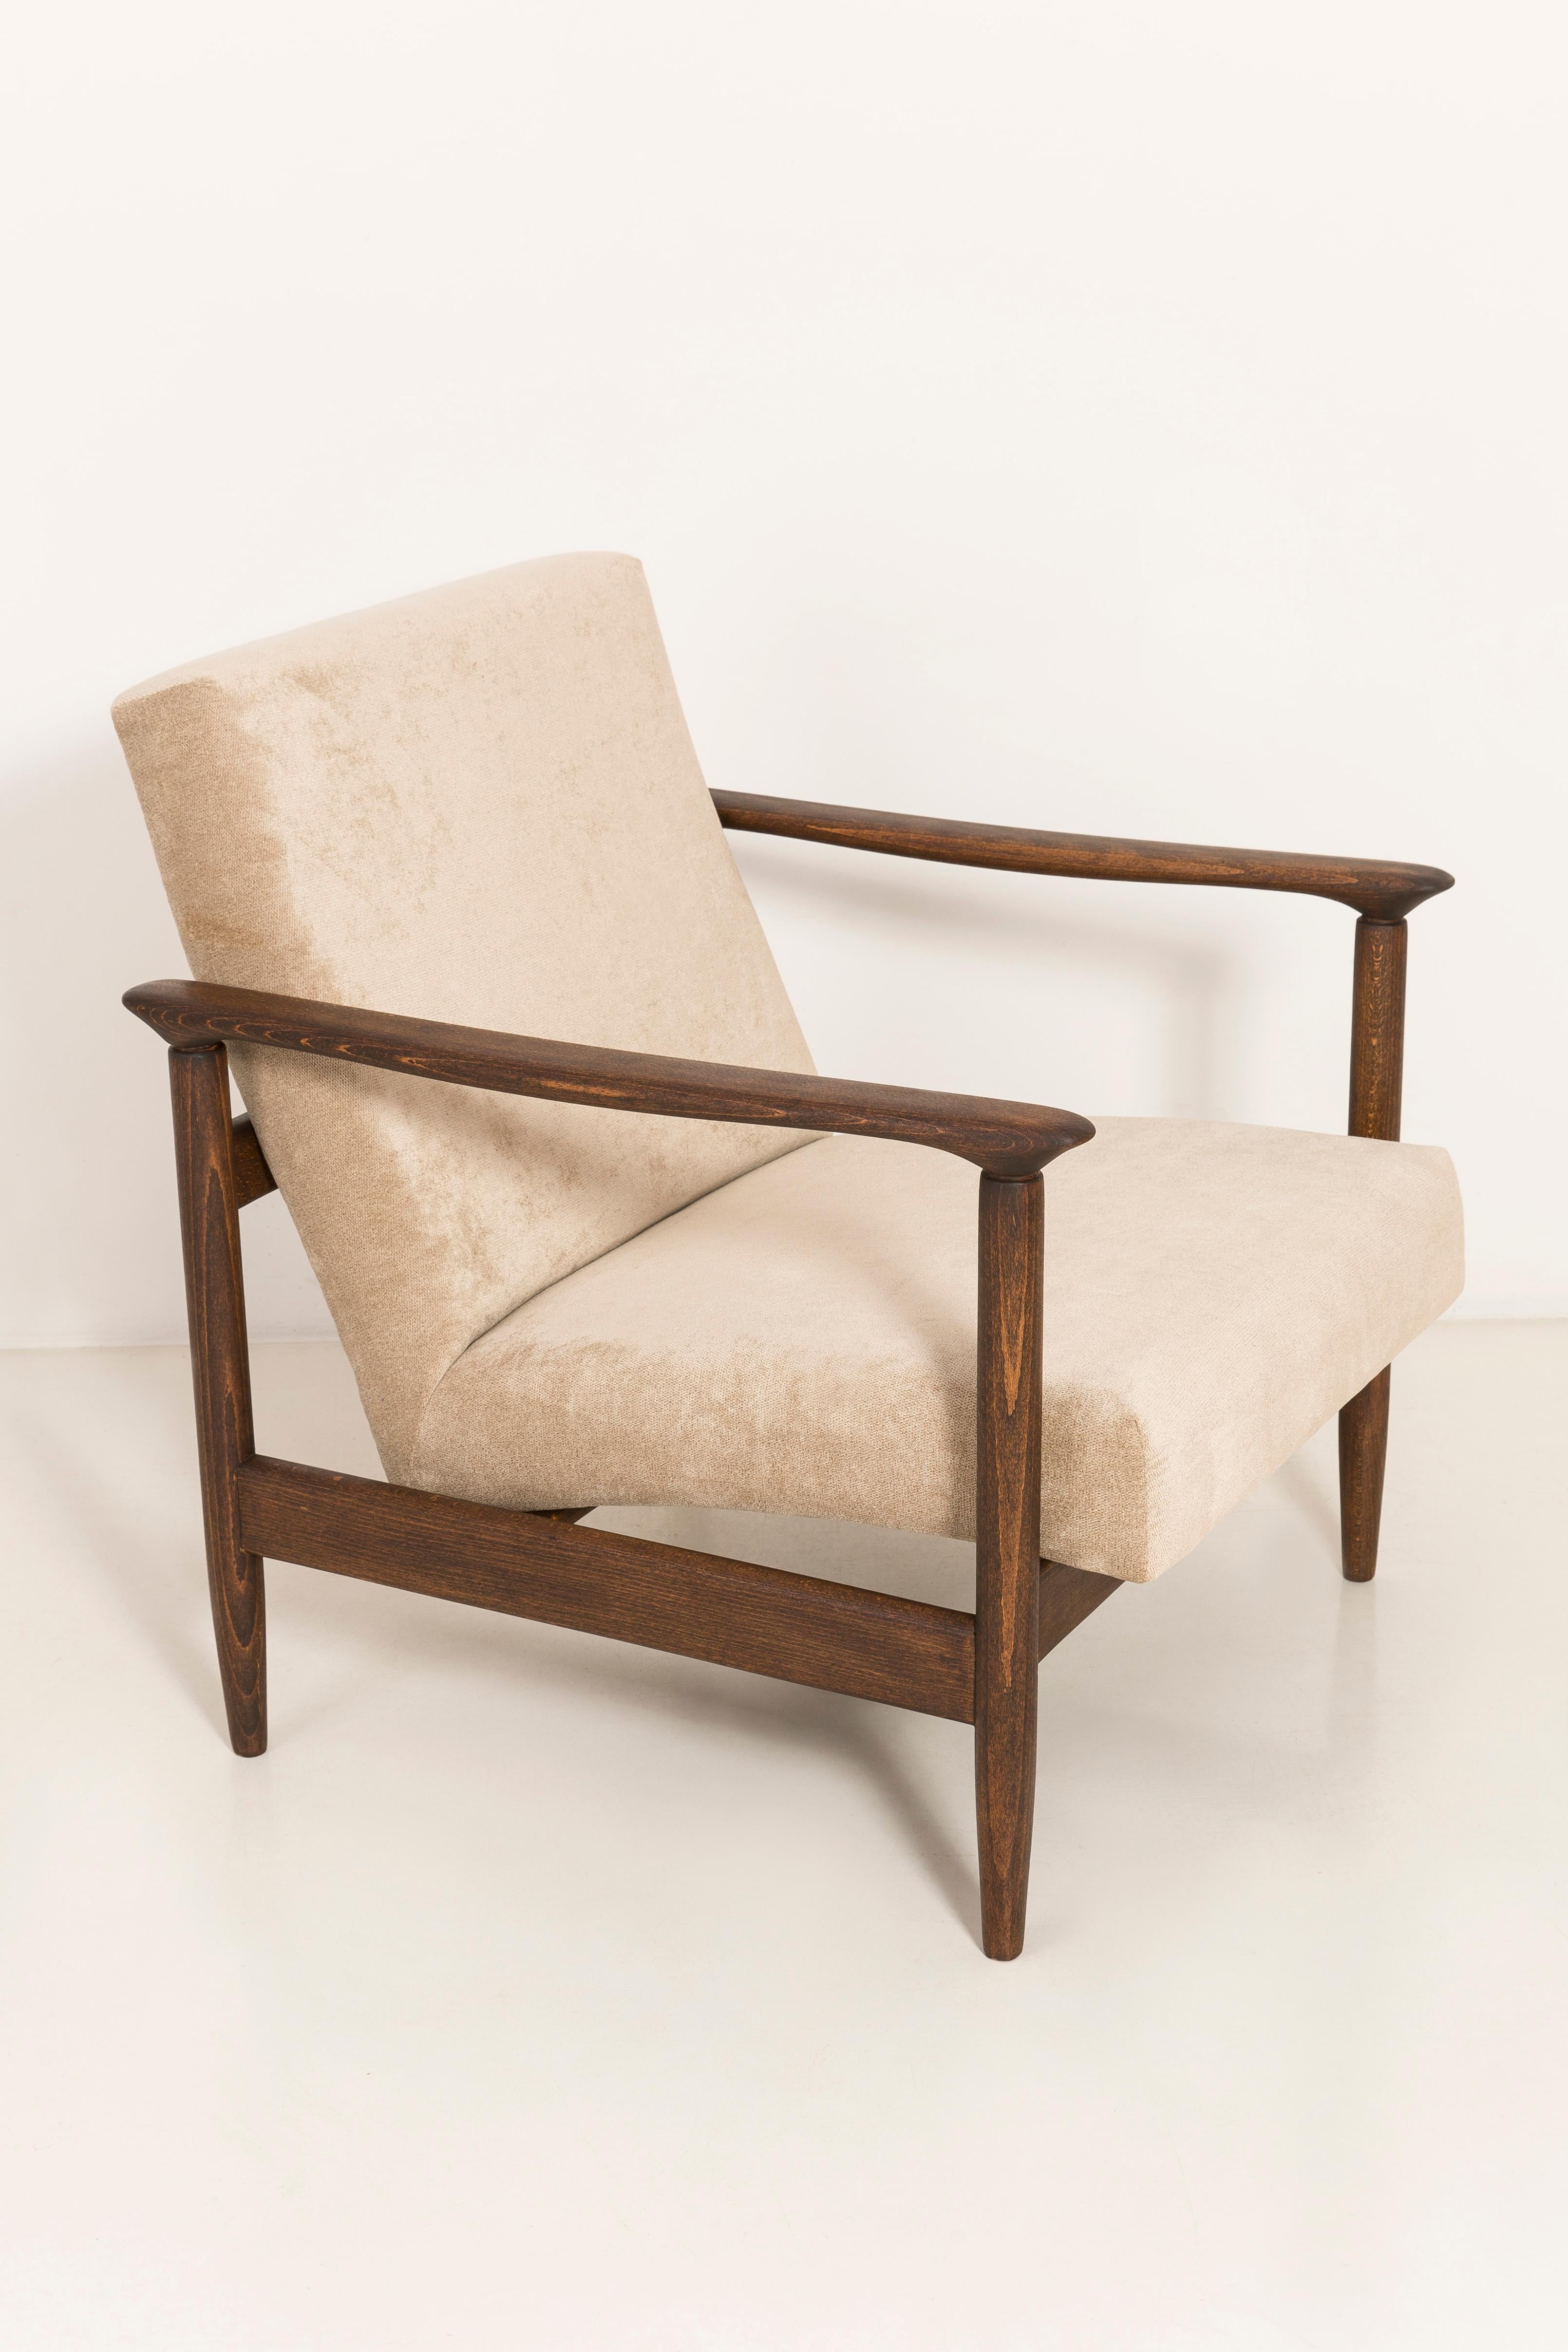 Hand-Crafted Set of Four Mid-Century Modern Beige Armchairs, Edmund Homa, 1960s, Poland For Sale